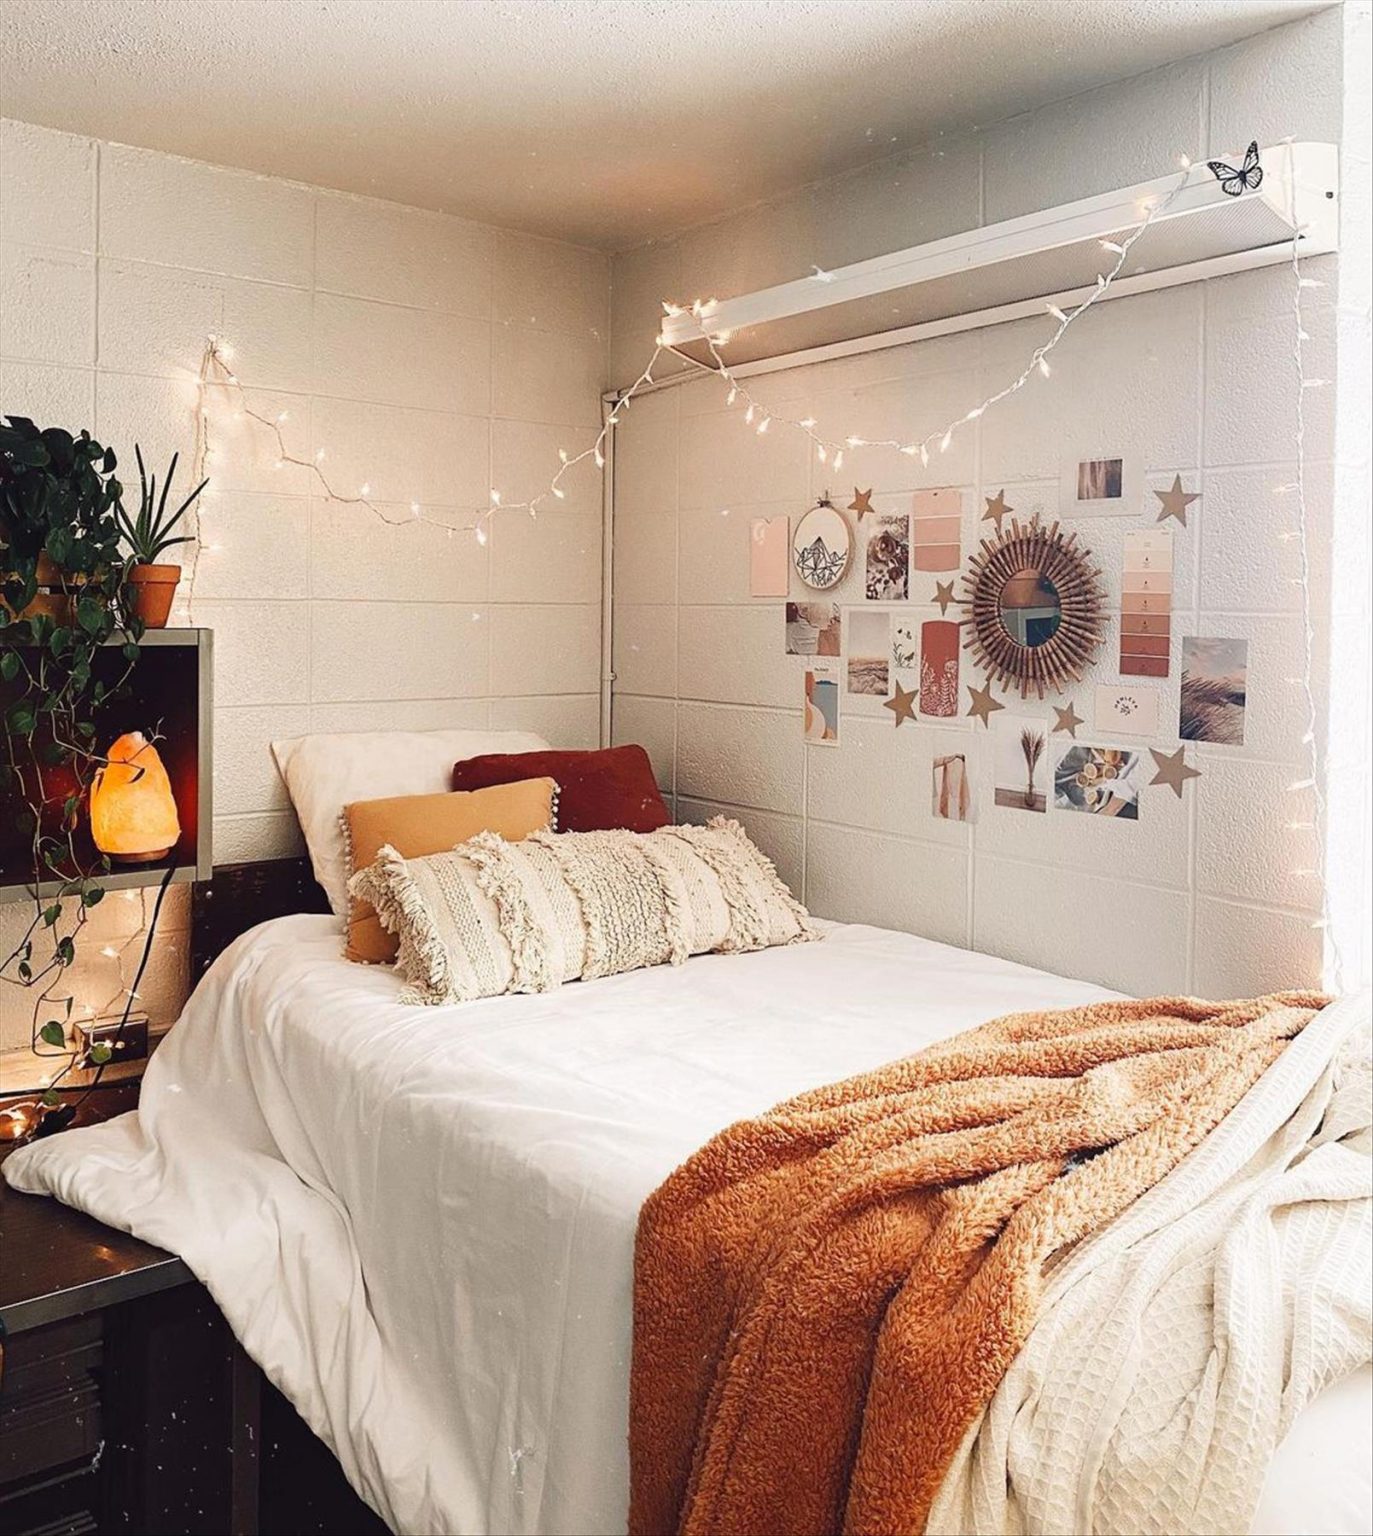 48 Trendy dorm room ideas you'll love to try - Page 2 of 2 - Mycozylive.com